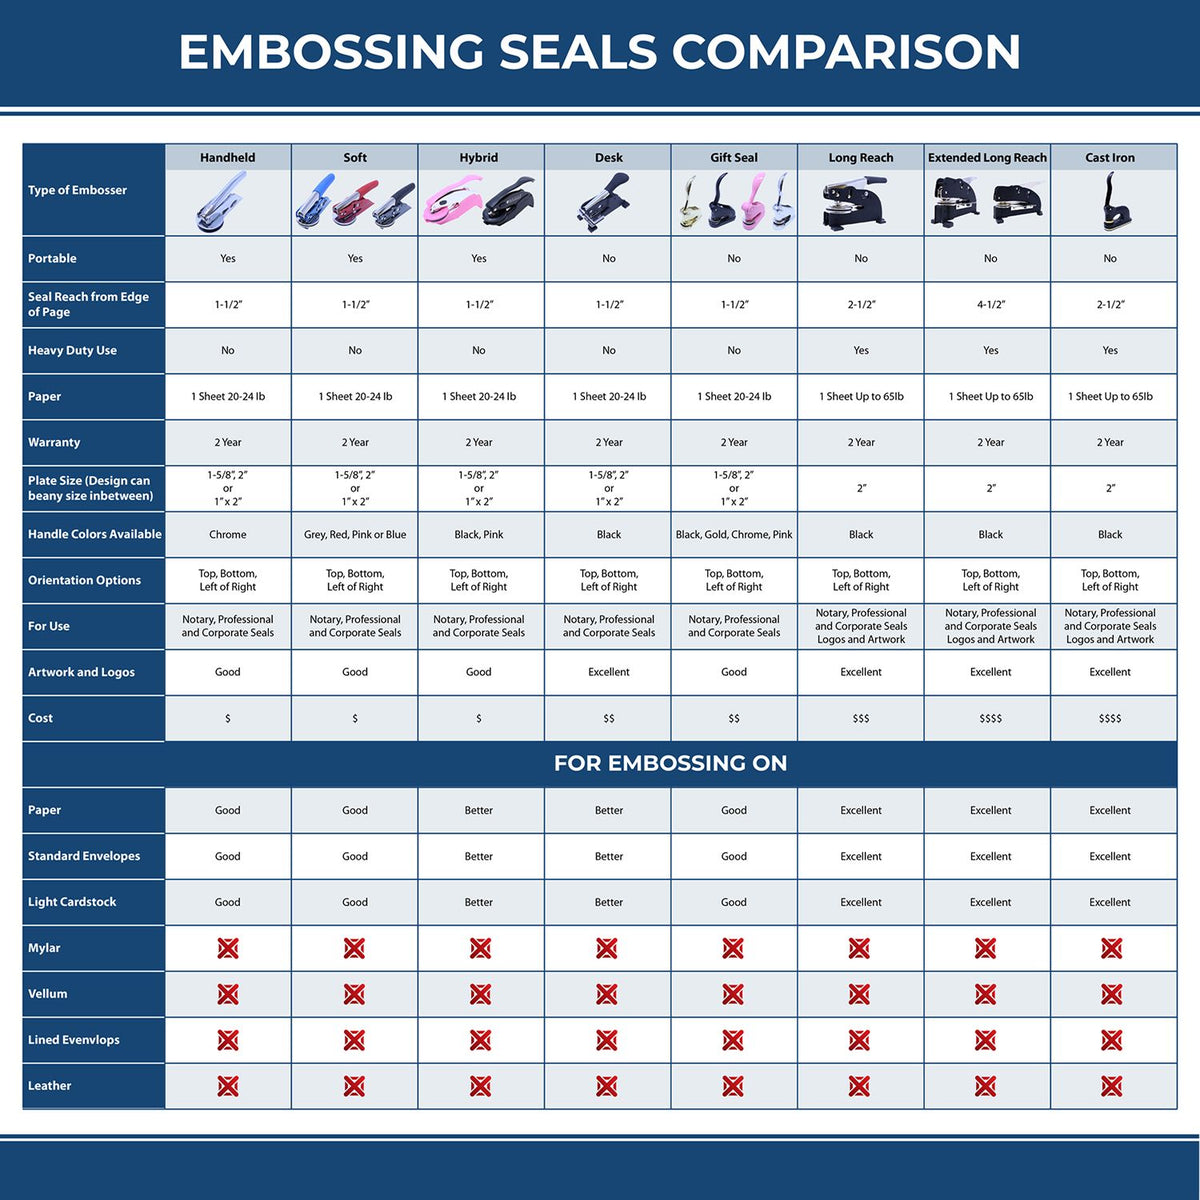 A comparison chart for the different types of mount models available for the Gift Idaho Land Surveyor Seal